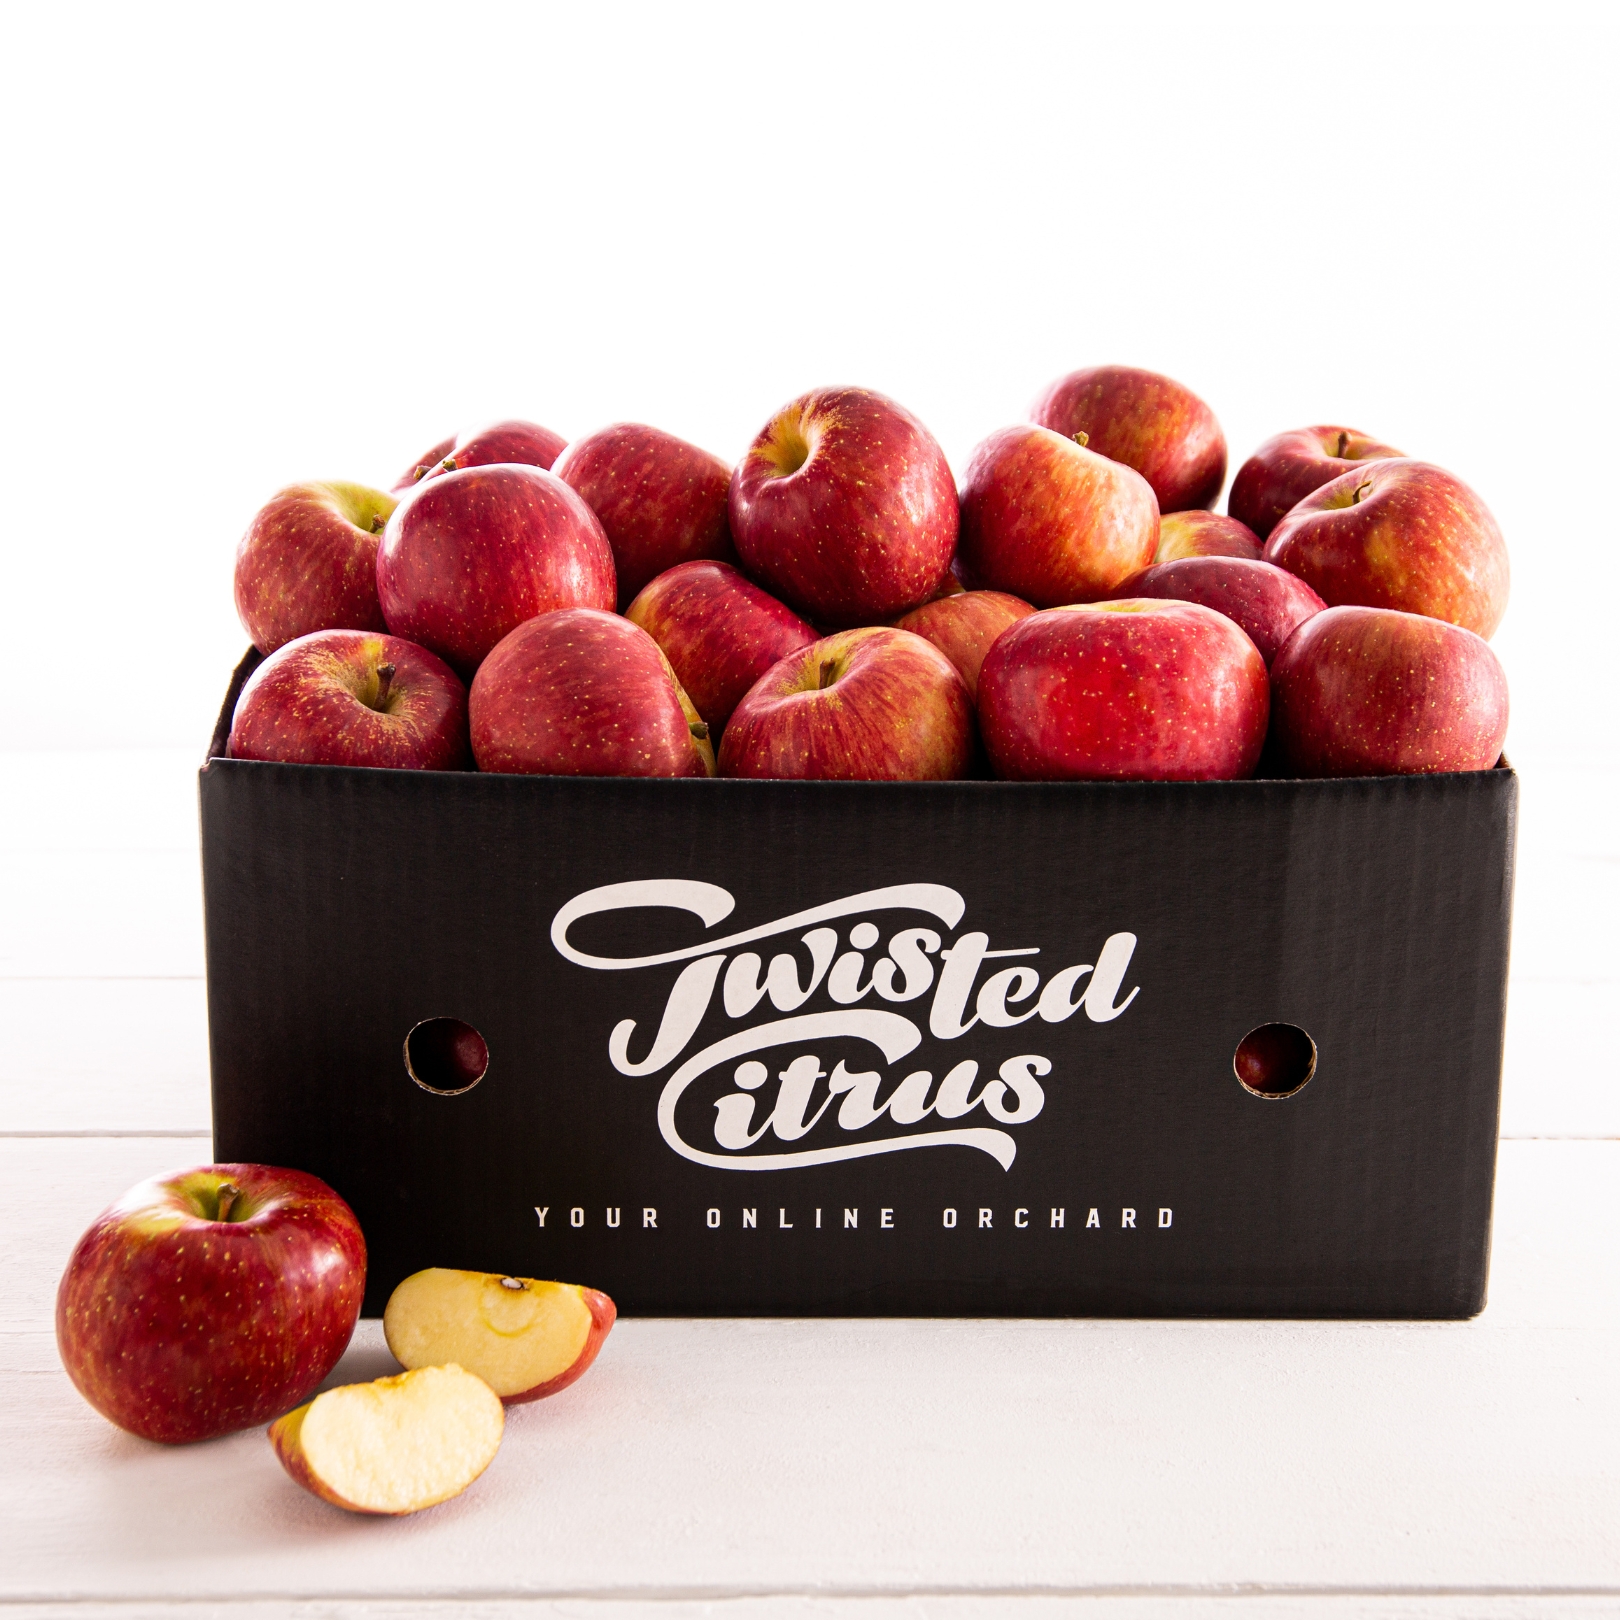 Buy Apples - Ambrosia Online NZ - Twisted Citrus